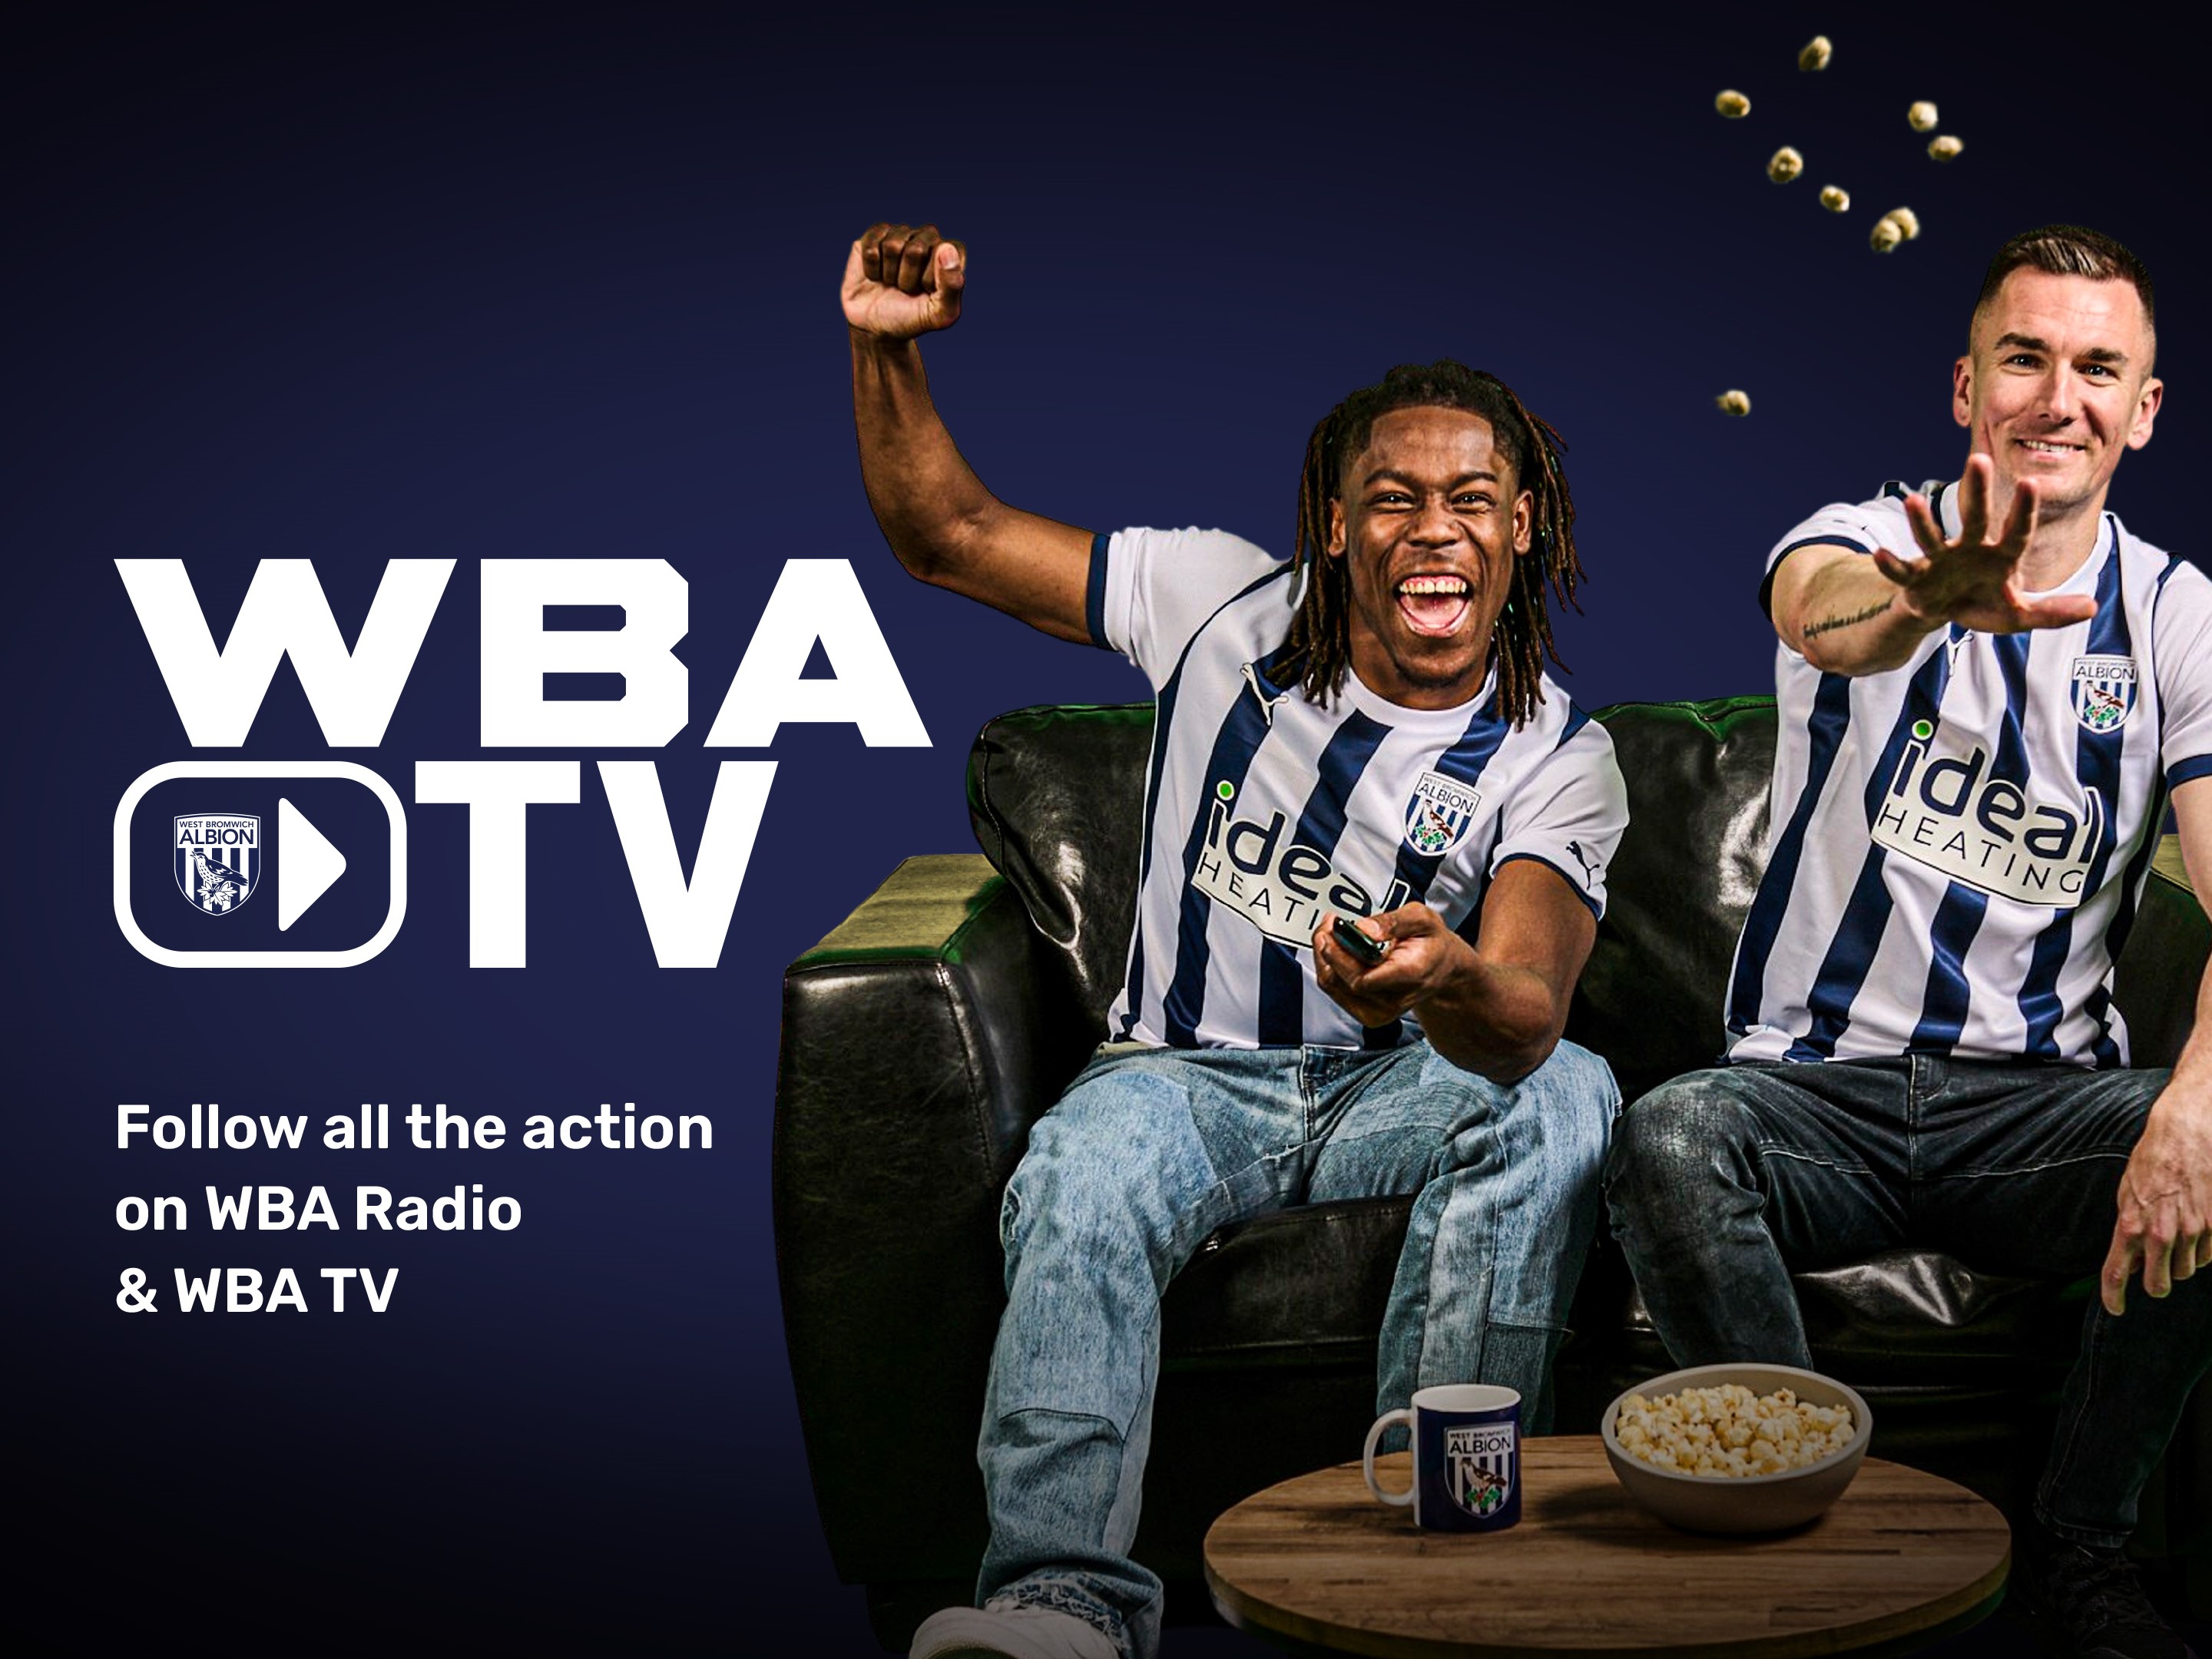 WBA TV matchday information graphic featuring Brandon Thomas-Asante cheering and Jed Wallace throwing popcorn.  